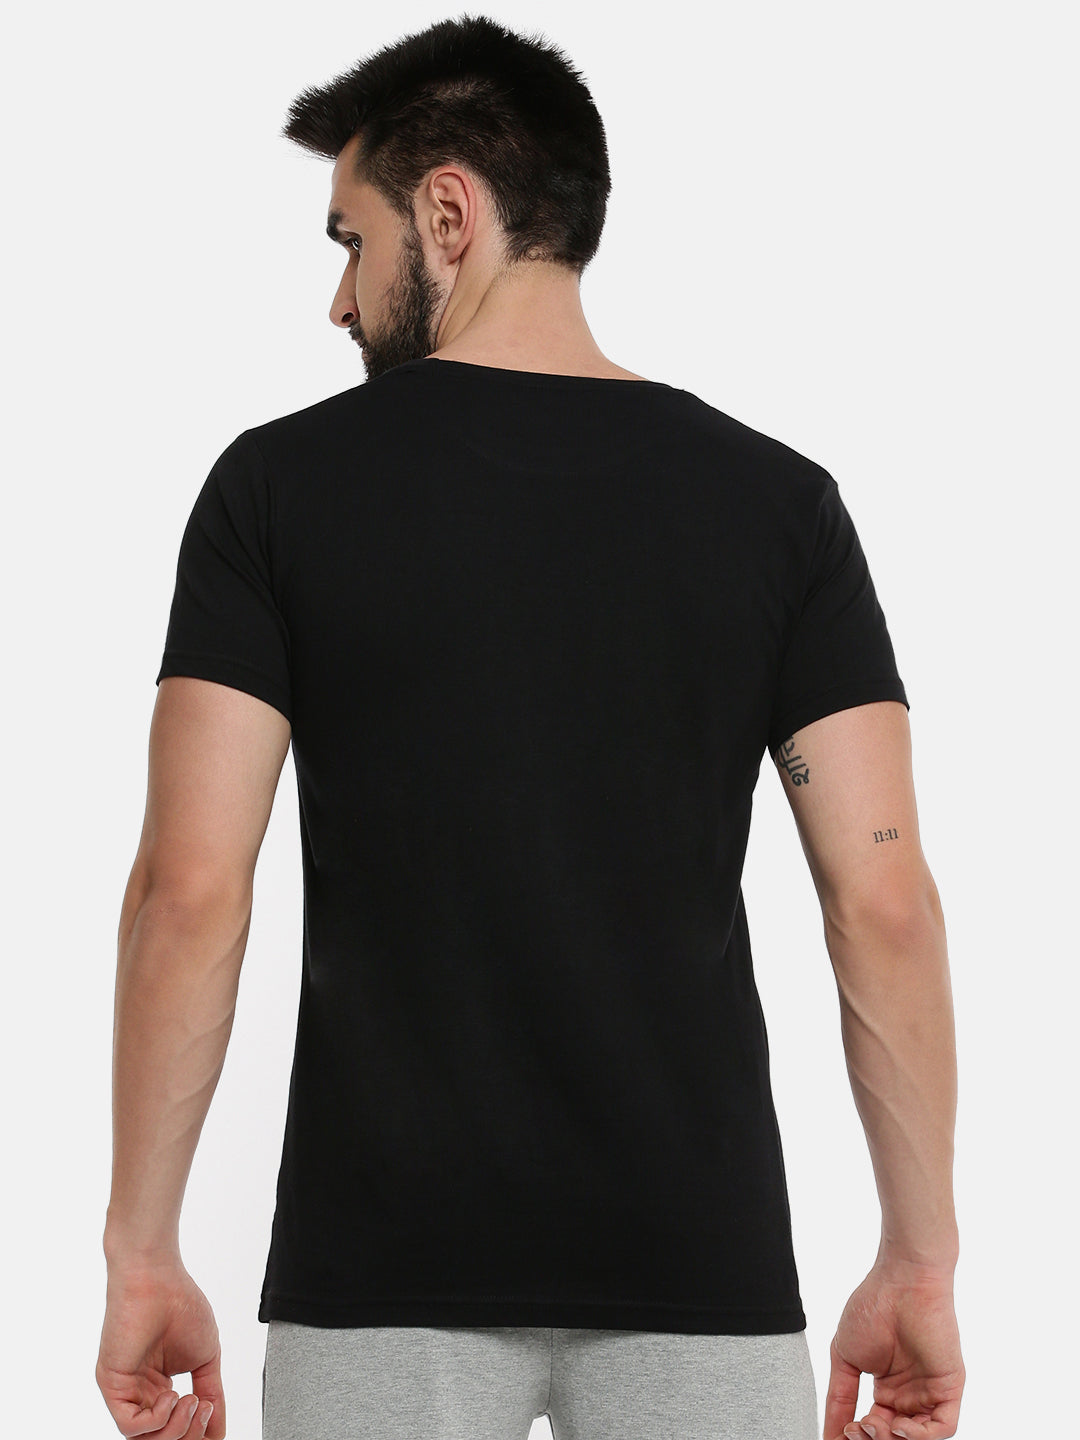 Graphic Printed Black Cotton Blend Round Neck T-Shirt GT15-Back view